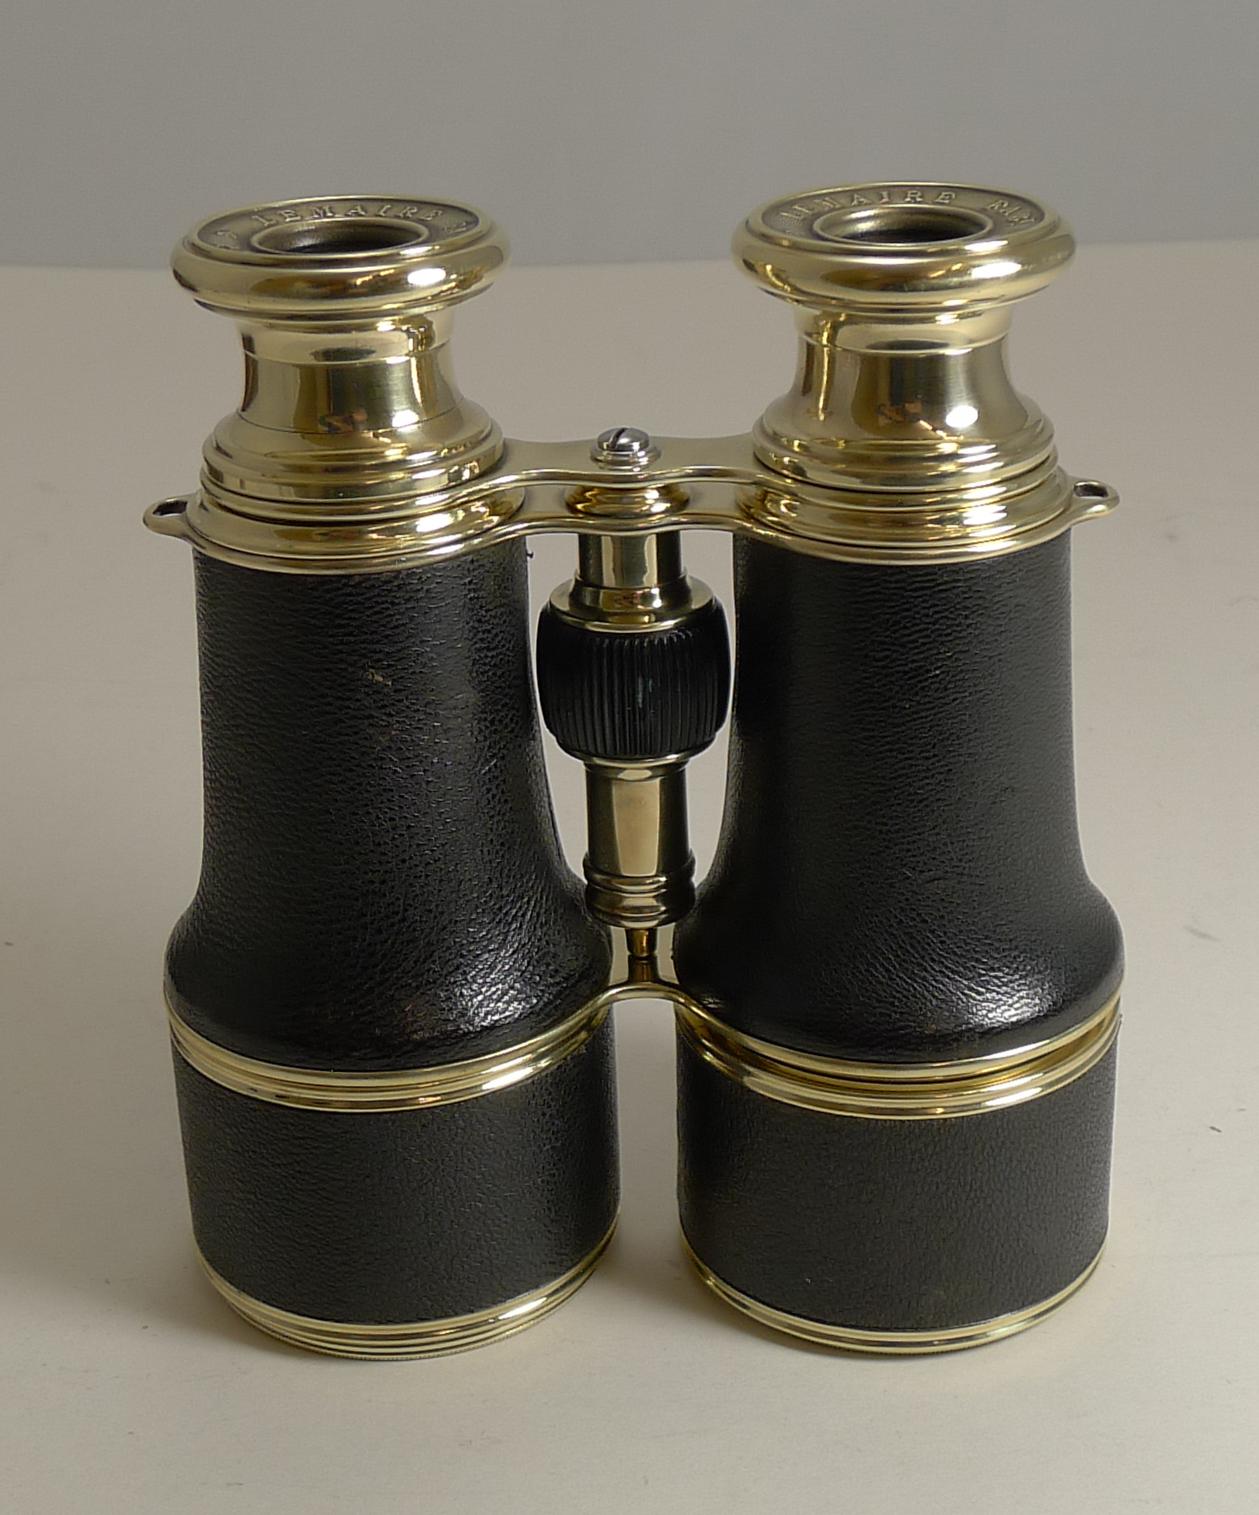 Pair of WWI Binoculars and Case, British Officer's Issue, 1916, LeMaire, Paris 4